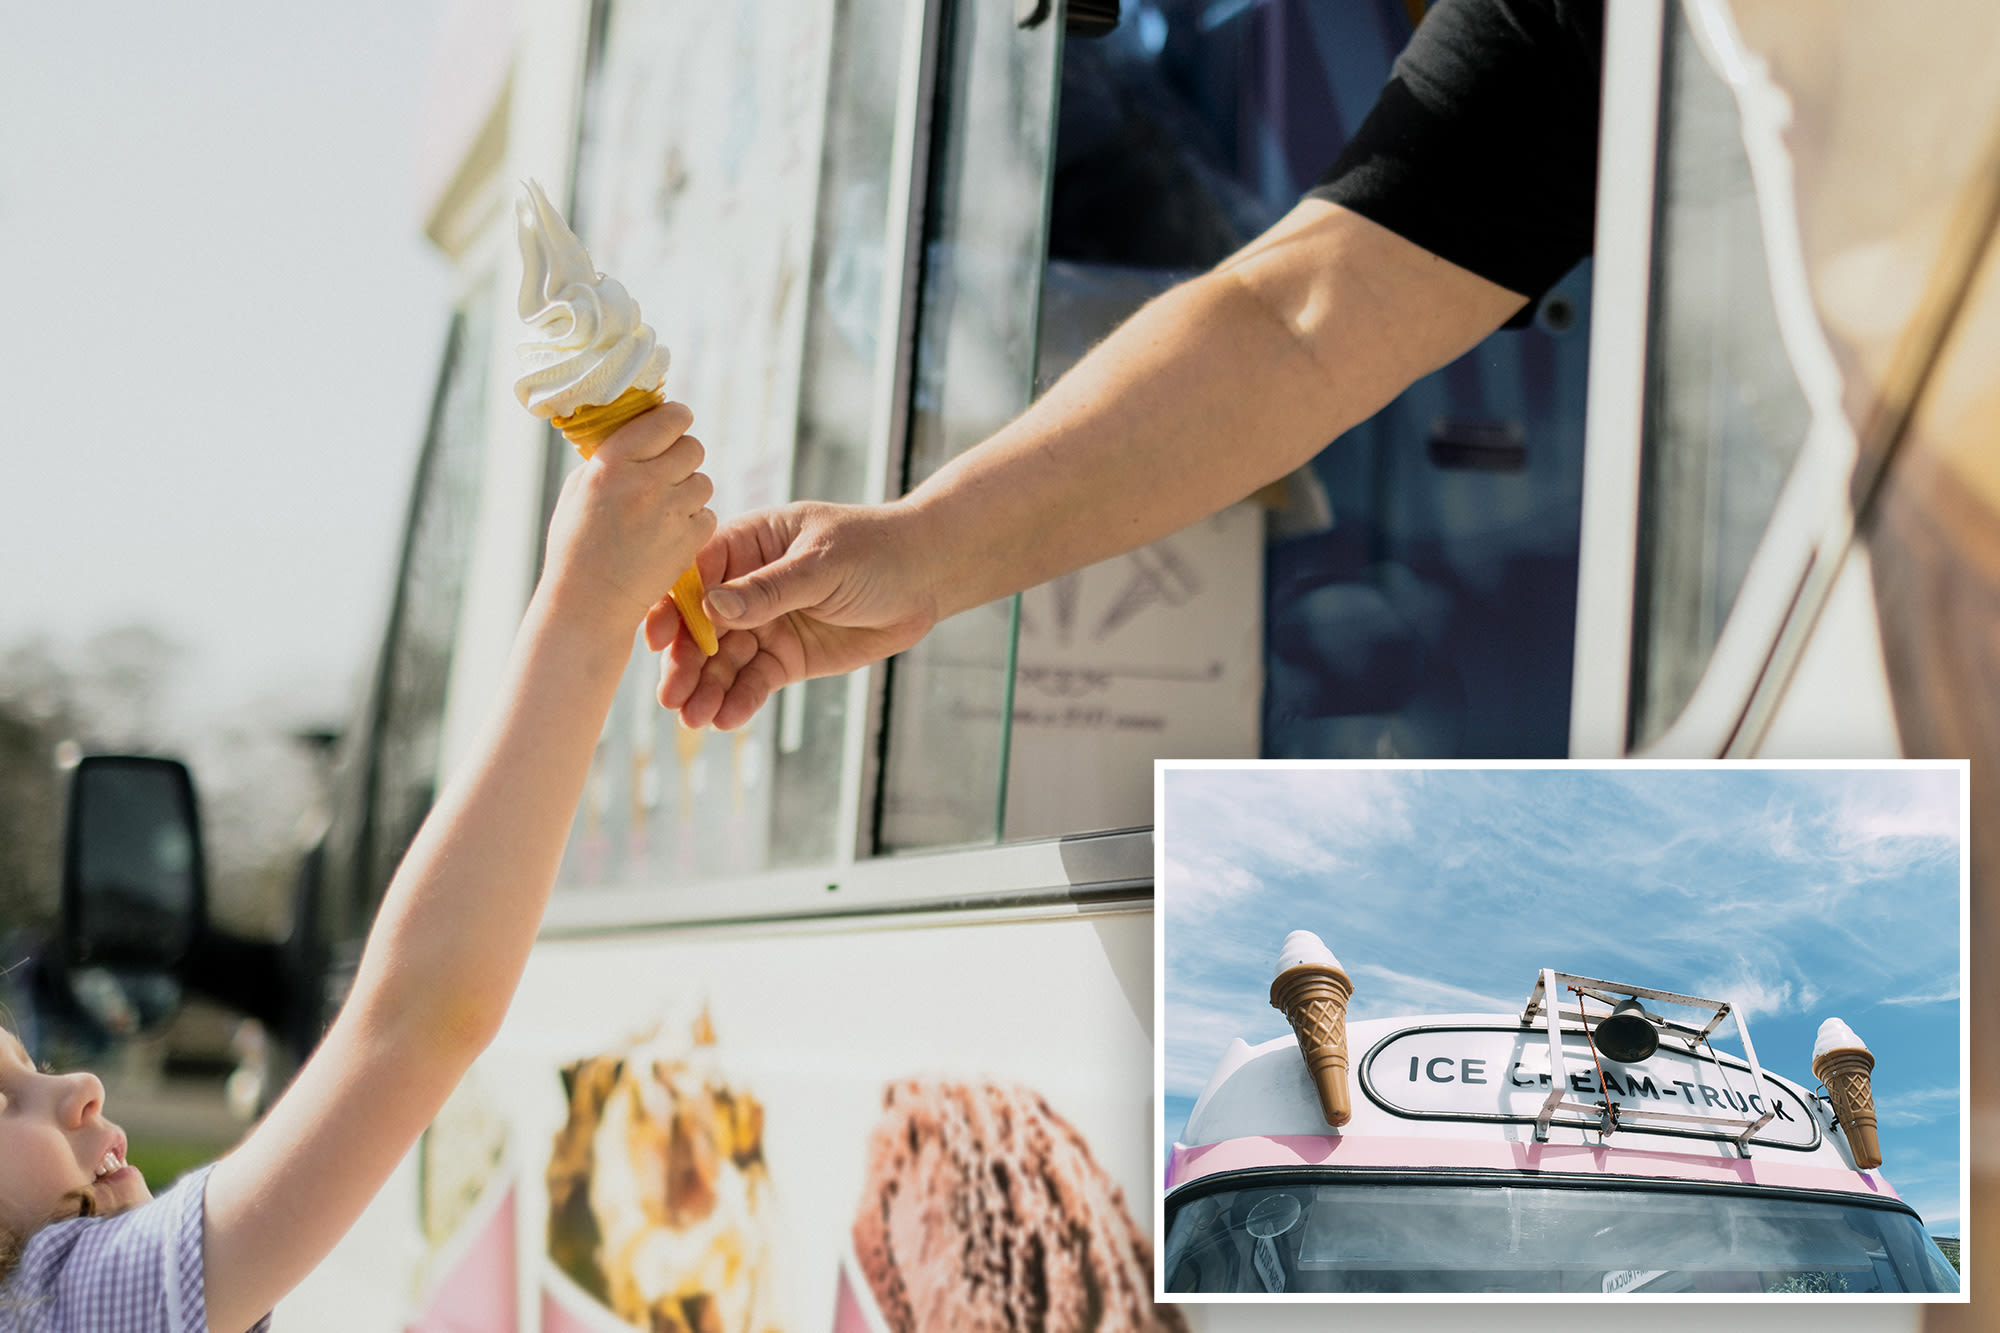 Mom praised for ‘petty revenge’ on ice cream man who scammed child: ‘Yikes, that guy’s a jerk’